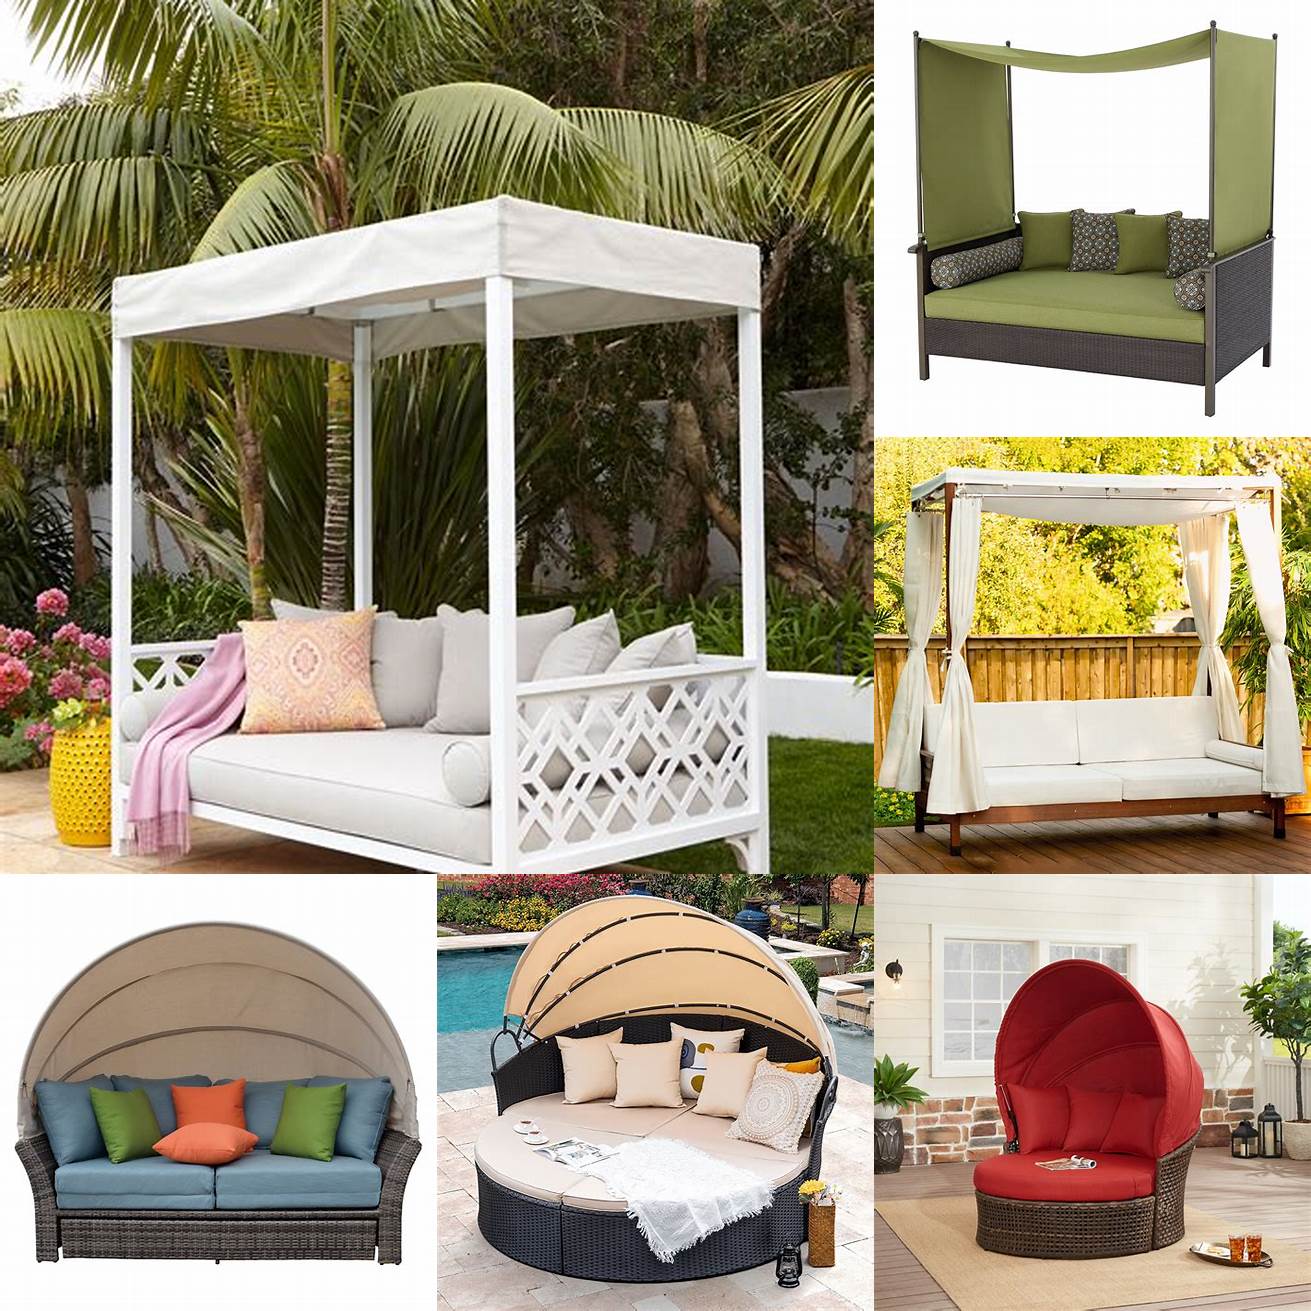 Outdoor day bed with canopy